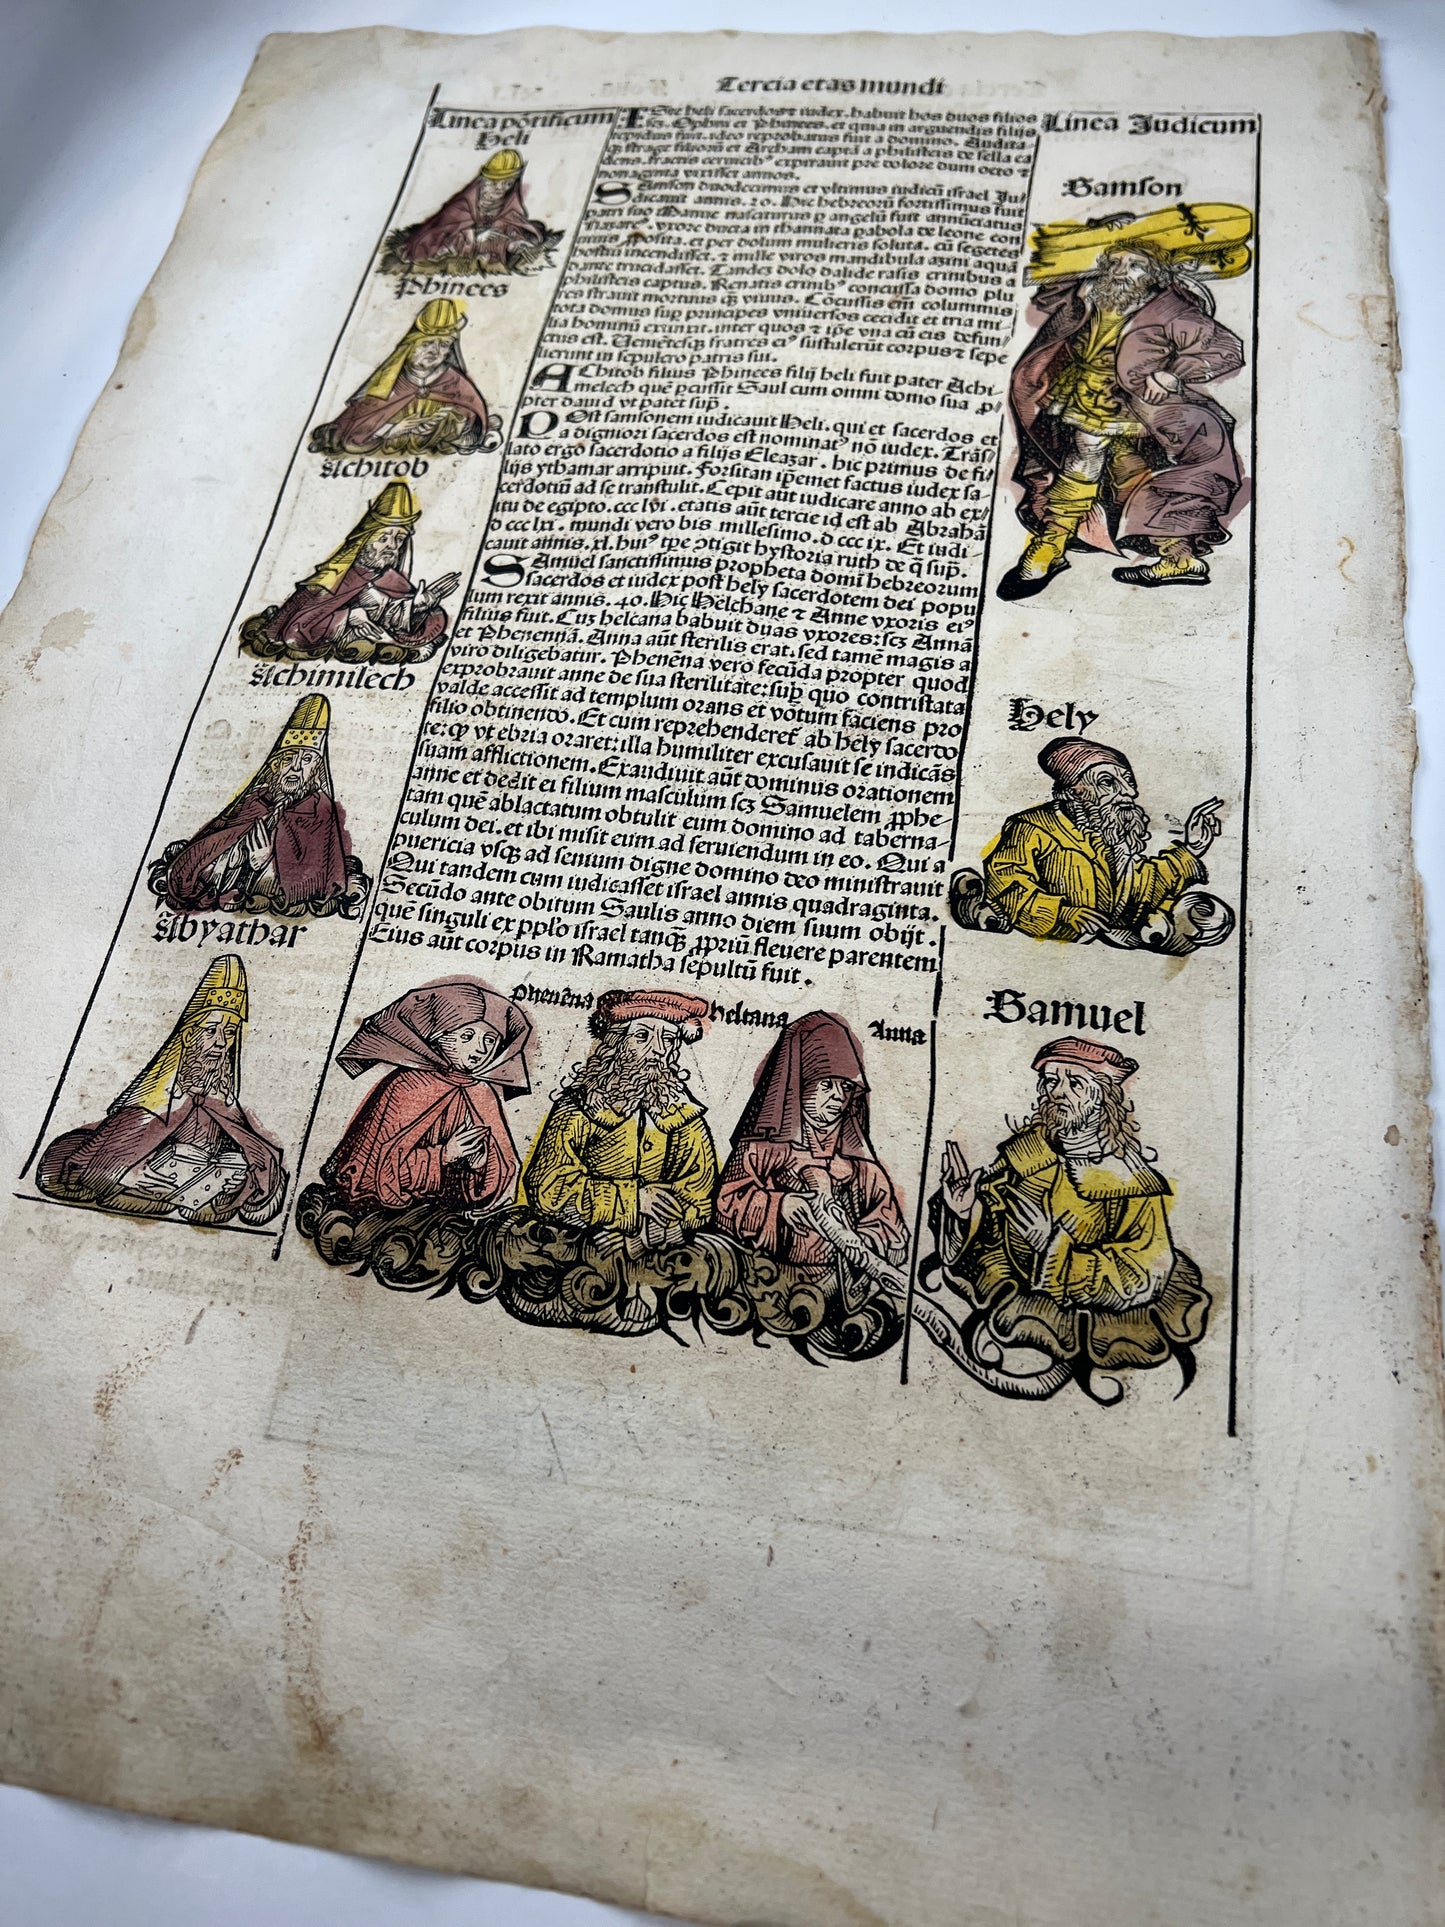 1493 Incunabula Leaf From the Nuremberg Chronicle of Hartmann Schedel - The Odyssey, Old Testament